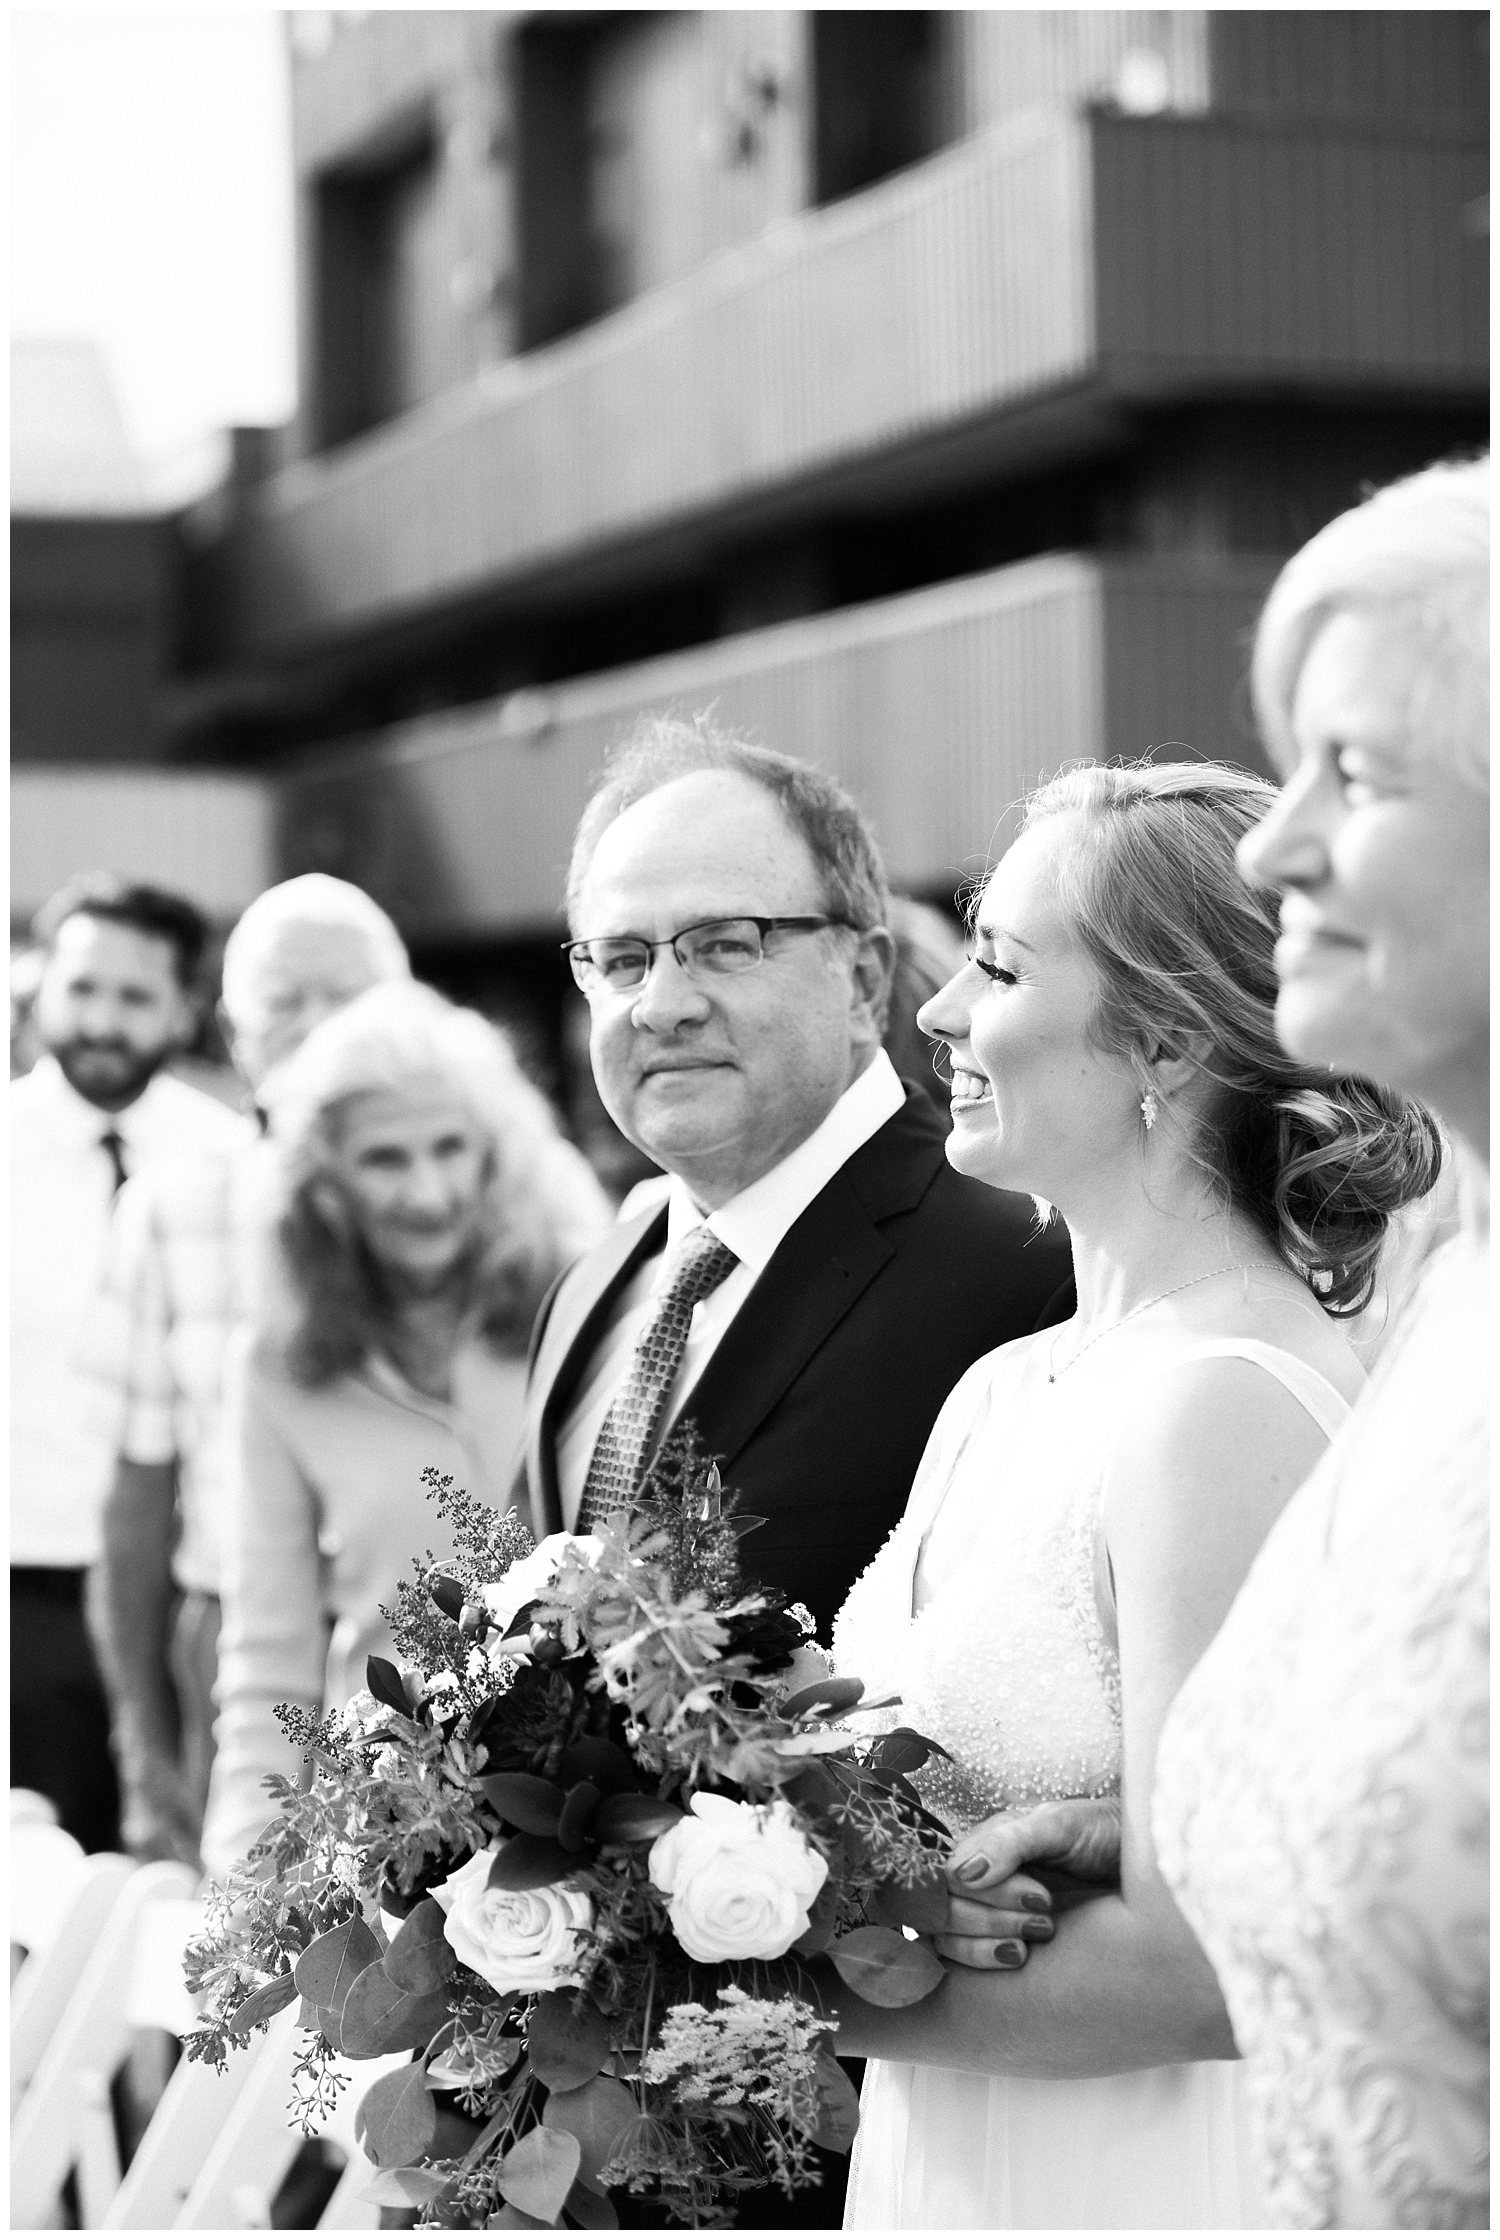 Father and mother walking daughter down the aisle at outside wedding ceremony at Sugarloaf Mountain Resort in Maine, photos by Halie Olszowy.